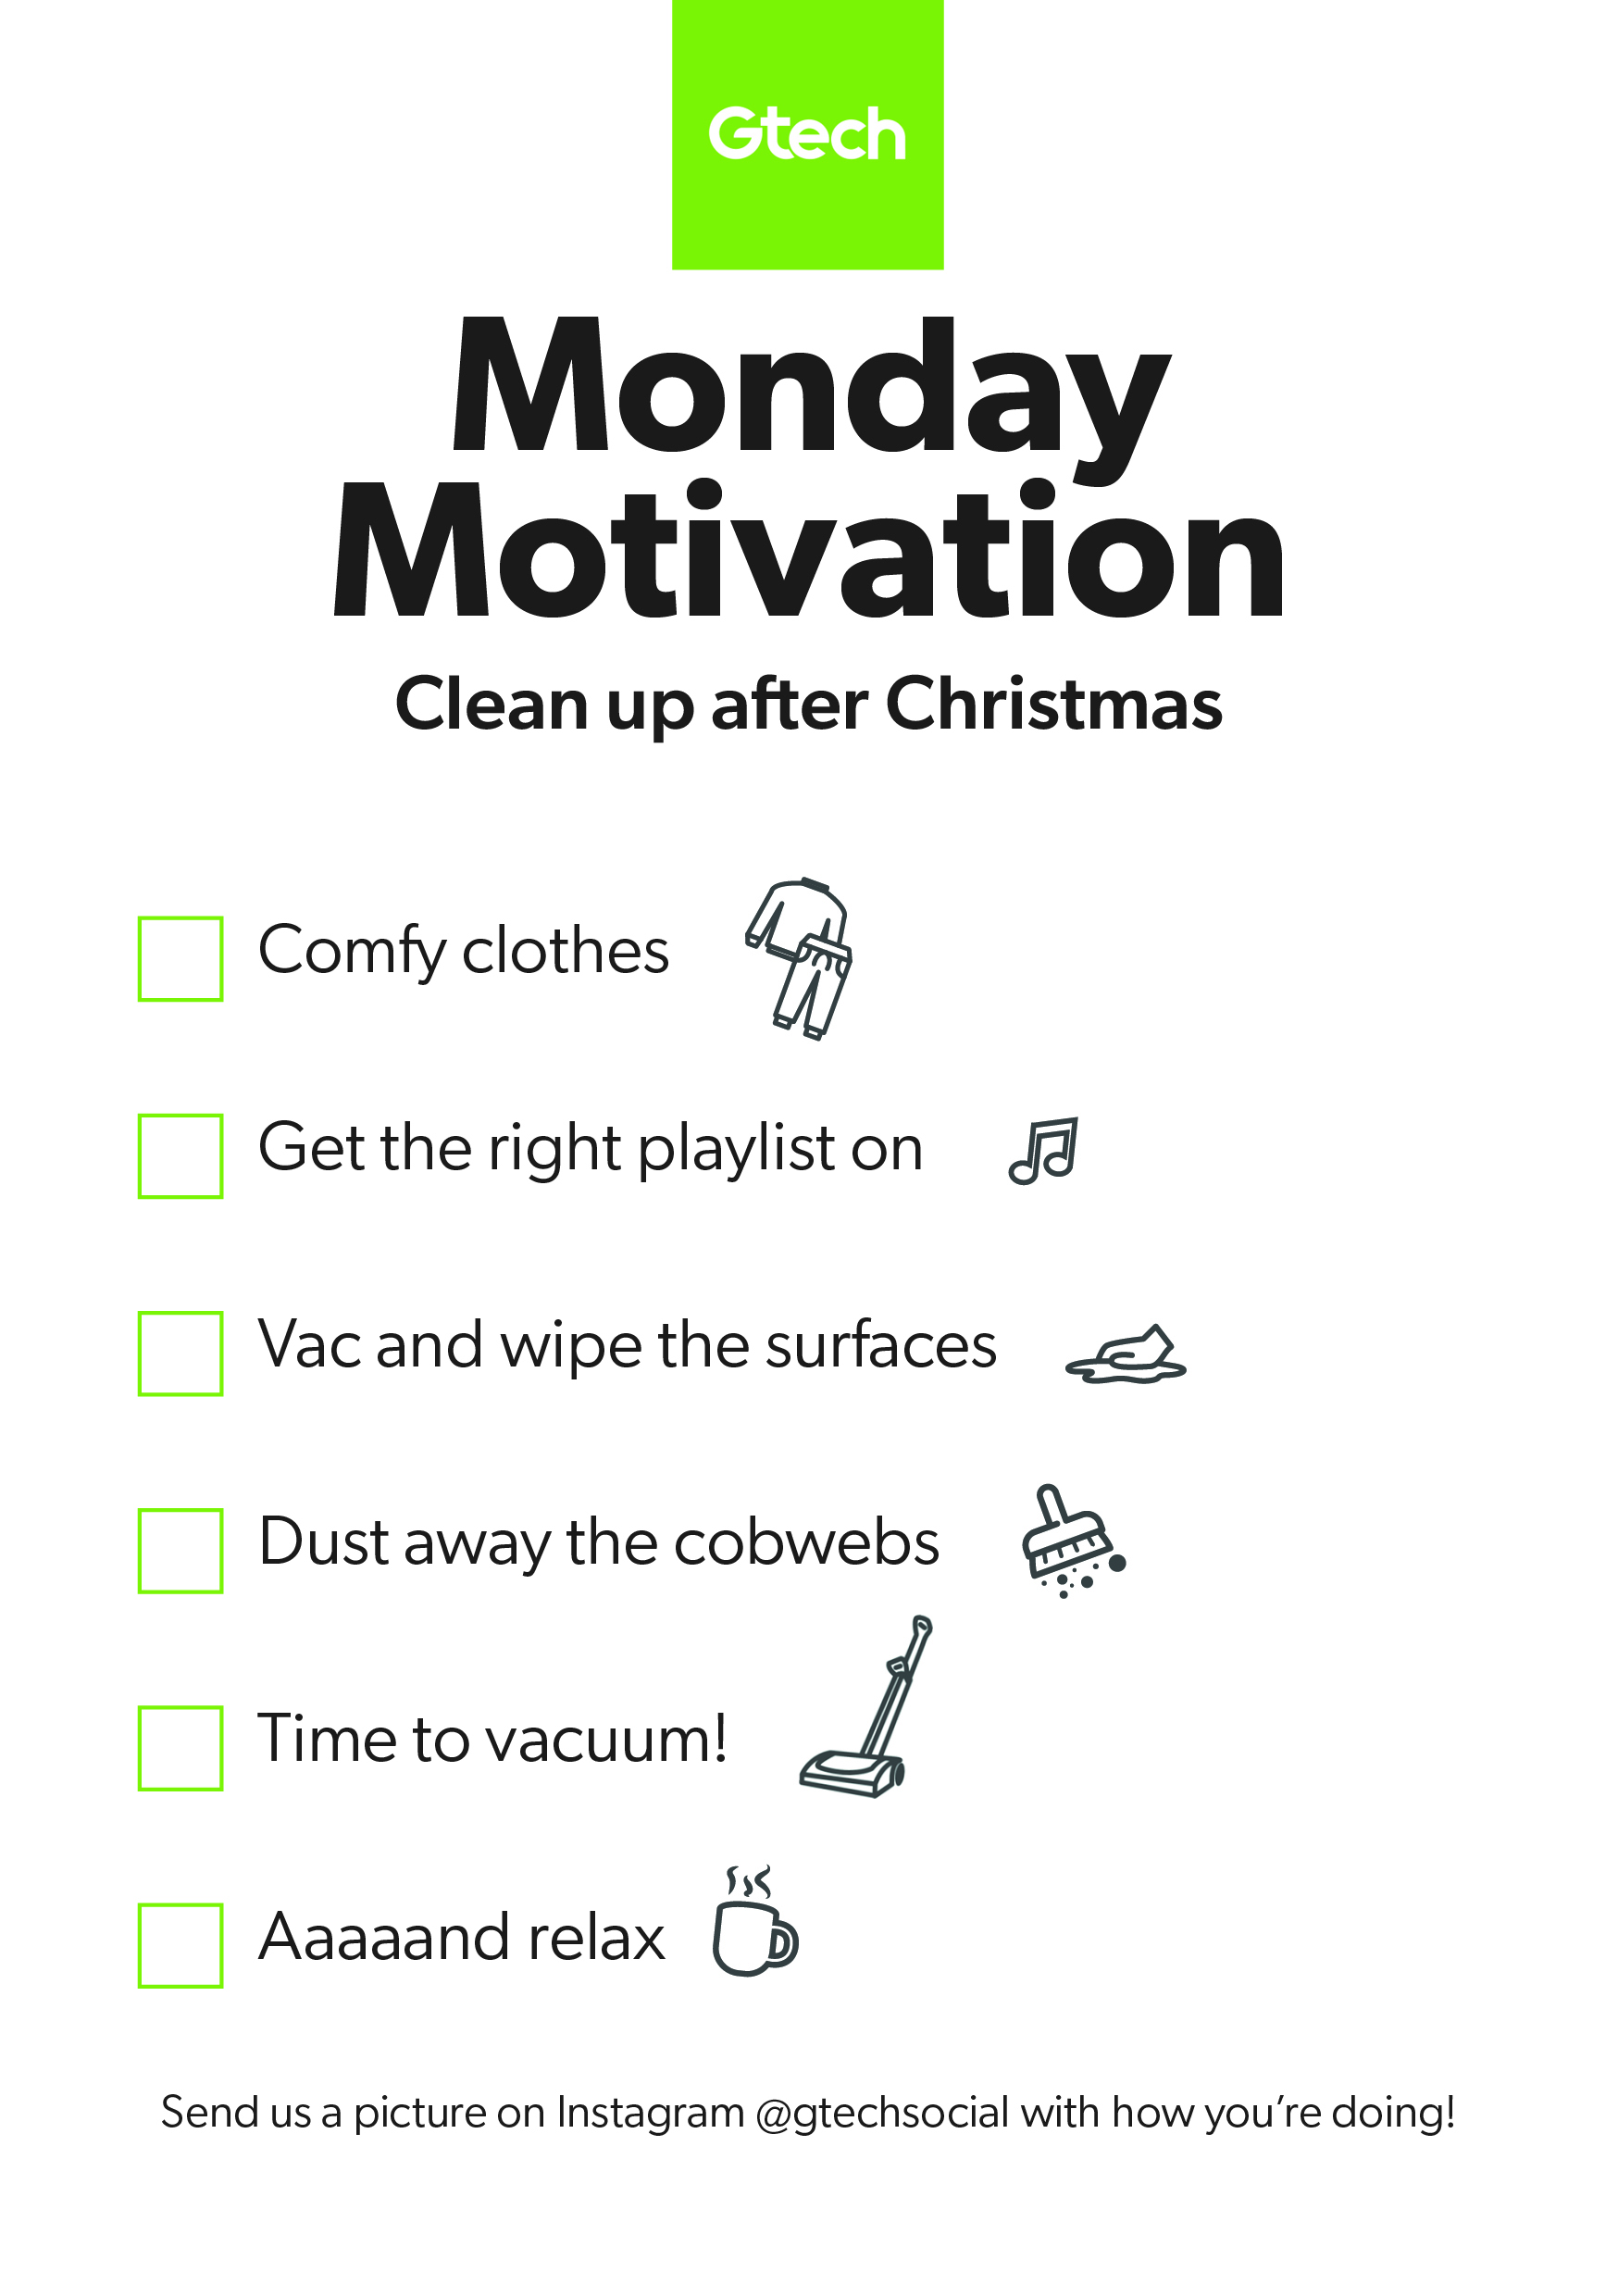 Post Christmas Clean Up checklist